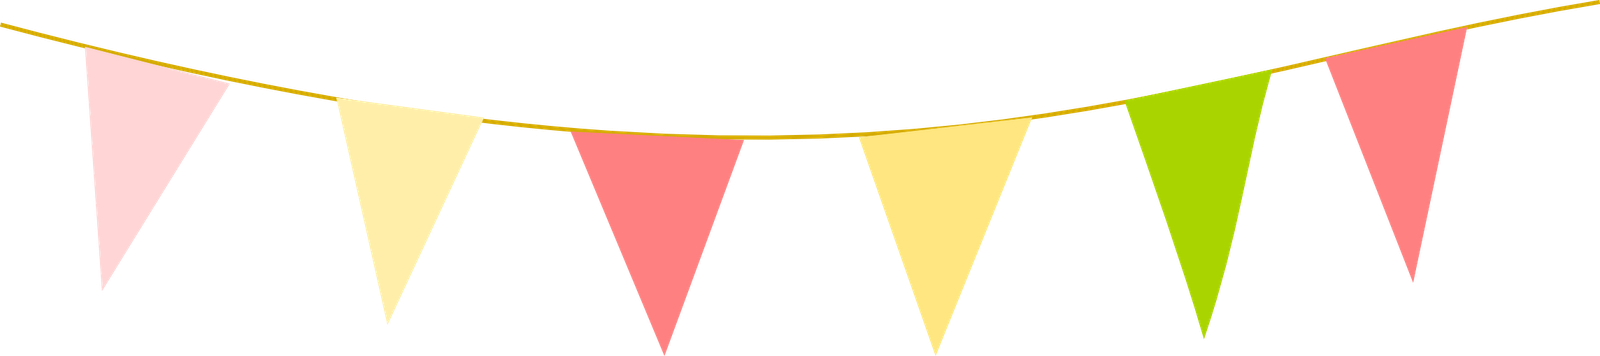 High Resolution Wallpaper | Bunting 1600x356 px